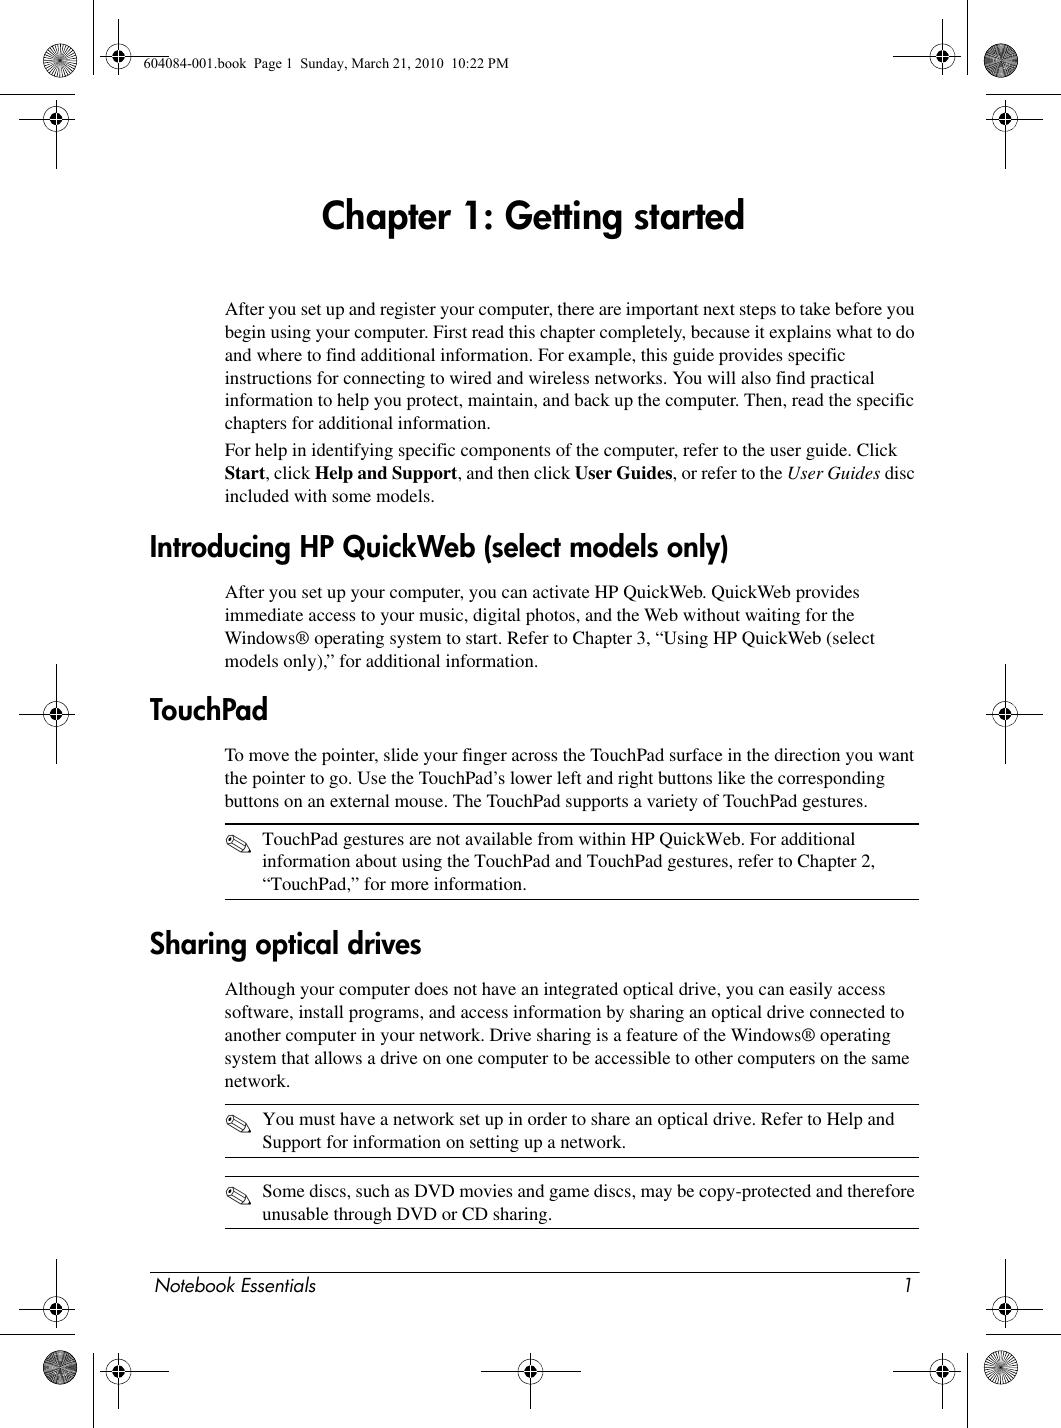 Notebook Essentials 1Chapter 1: Getting startedAfter you set up and register your computer, there are important next steps to take before you begin using your computer. First read this chapter completely, because it explains what to do and where to find additional information. For example, this guide provides specific instructions for connecting to wired and wireless networks. You will also find practical information to help you protect, maintain, and back up the computer. Then, read the specific chapters for additional information.For help in identifying specific components of the computer, refer to the user guide. Click Start, click Help and Support, and then click User Guides, or refer to the User Guides disc included with some models. After you set up your computer, you can activate HP QuickWeb. QuickWeb provides immediate access to your music, digital photos, and the Web without waiting for the Windows® operating system to start. Refer to Chapter 3, “Using HP QuickWeb (select models only),” for additional information.To move the pointer, slide your finger across the TouchPad surface in the direction you want the pointer to go. Use the TouchPad’s lower left and right buttons like the corresponding buttons on an external mouse. The TouchPad supports a variety of TouchPad gestures.✎TouchPad gestures are not available from within HP QuickWeb. For additional information about using the TouchPad and TouchPad gestures, refer to Chapter 2, “TouchPad,” for more information.Although your computer does not have an integrated optical drive, you can easily access software, install programs, and access information by sharing an optical drive connected to another computer in your network. Drive sharing is a feature of the Windows® operating system that allows a drive on one computer to be accessible to other computers on the same network.✎You must have a network set up in order to share an optical drive. Refer to Help and Support for information on setting up a network.✎Some discs, such as DVD movies and game discs, may be copy-protected and therefore unusable through DVD or CD sharing.Introducing HP QuickWeb (select models only)TouchPadSharing optical drives 604084-001.book  Page 1  Sunday, March 21, 2010  10:22 PM